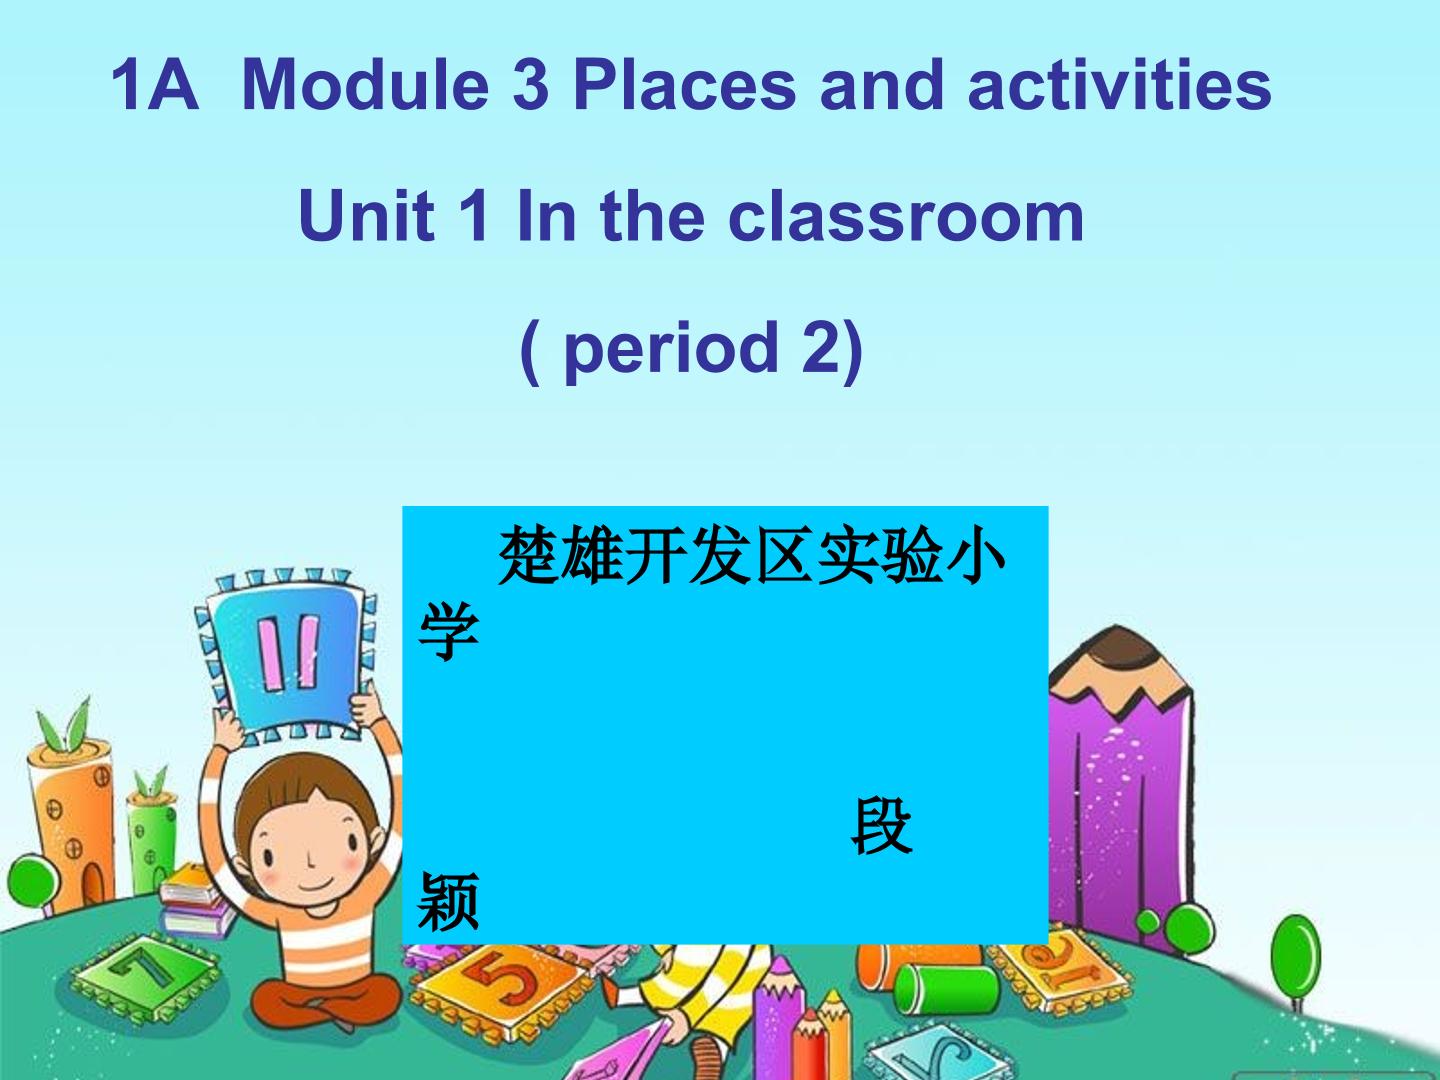 unit 1 In the classroom